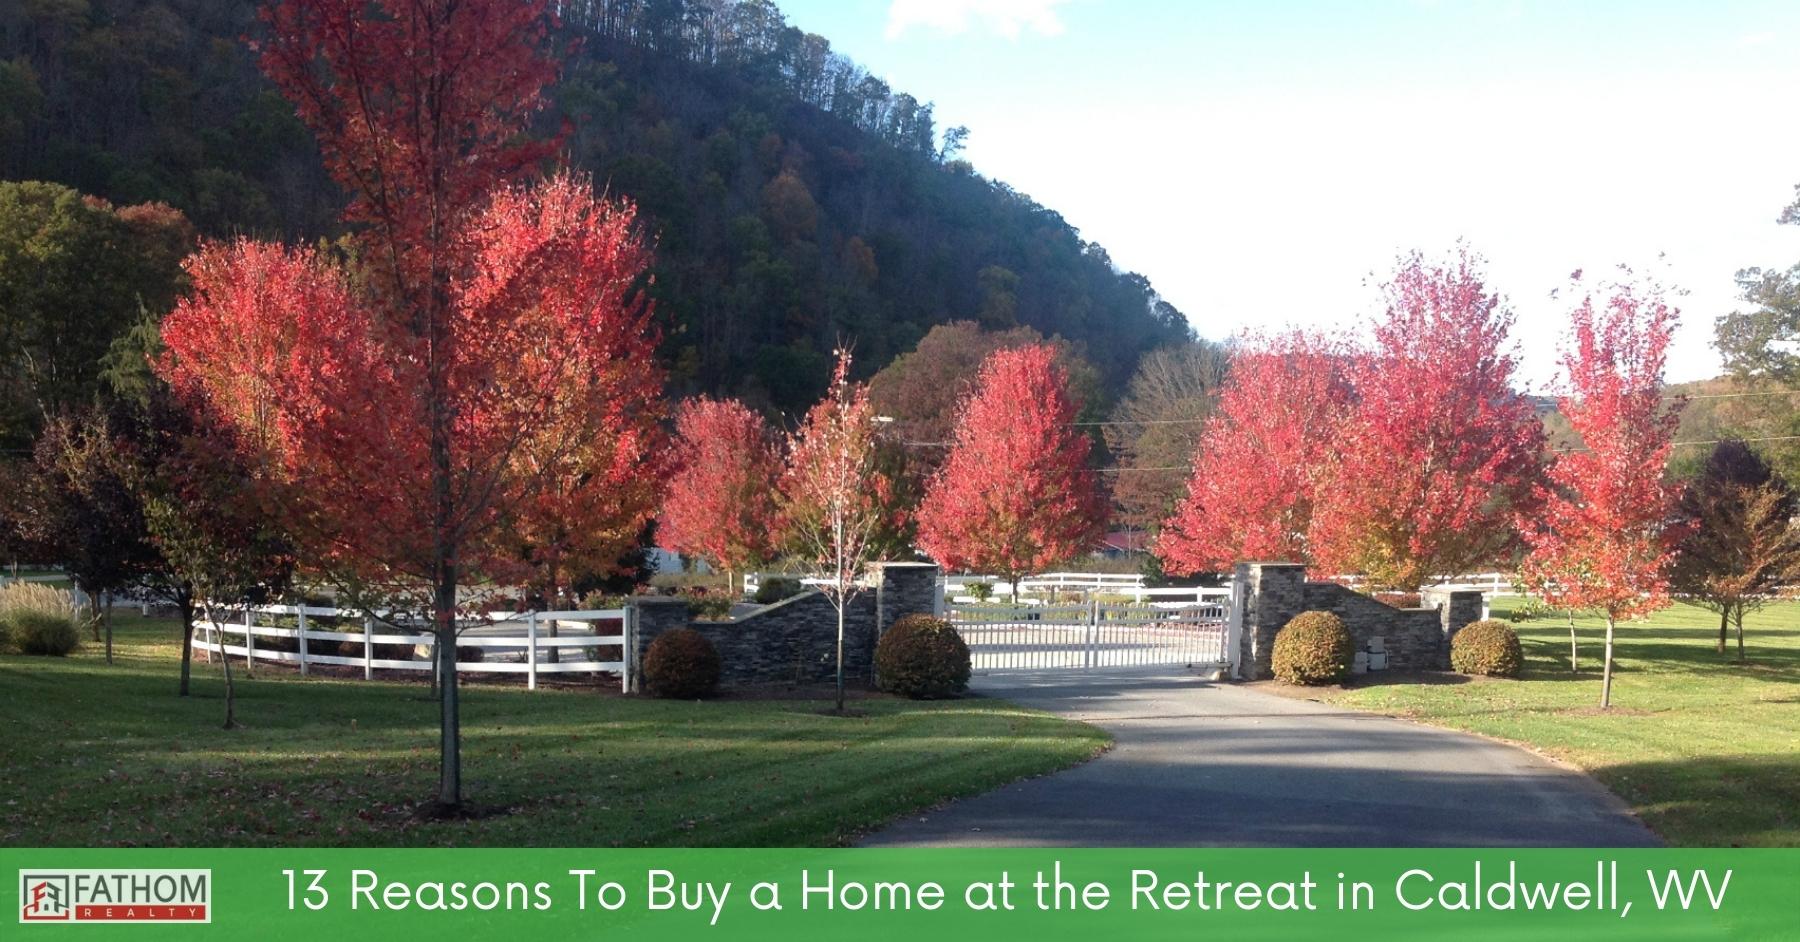 Reasons Why to Buy Home at Retreat in Caldwell WV